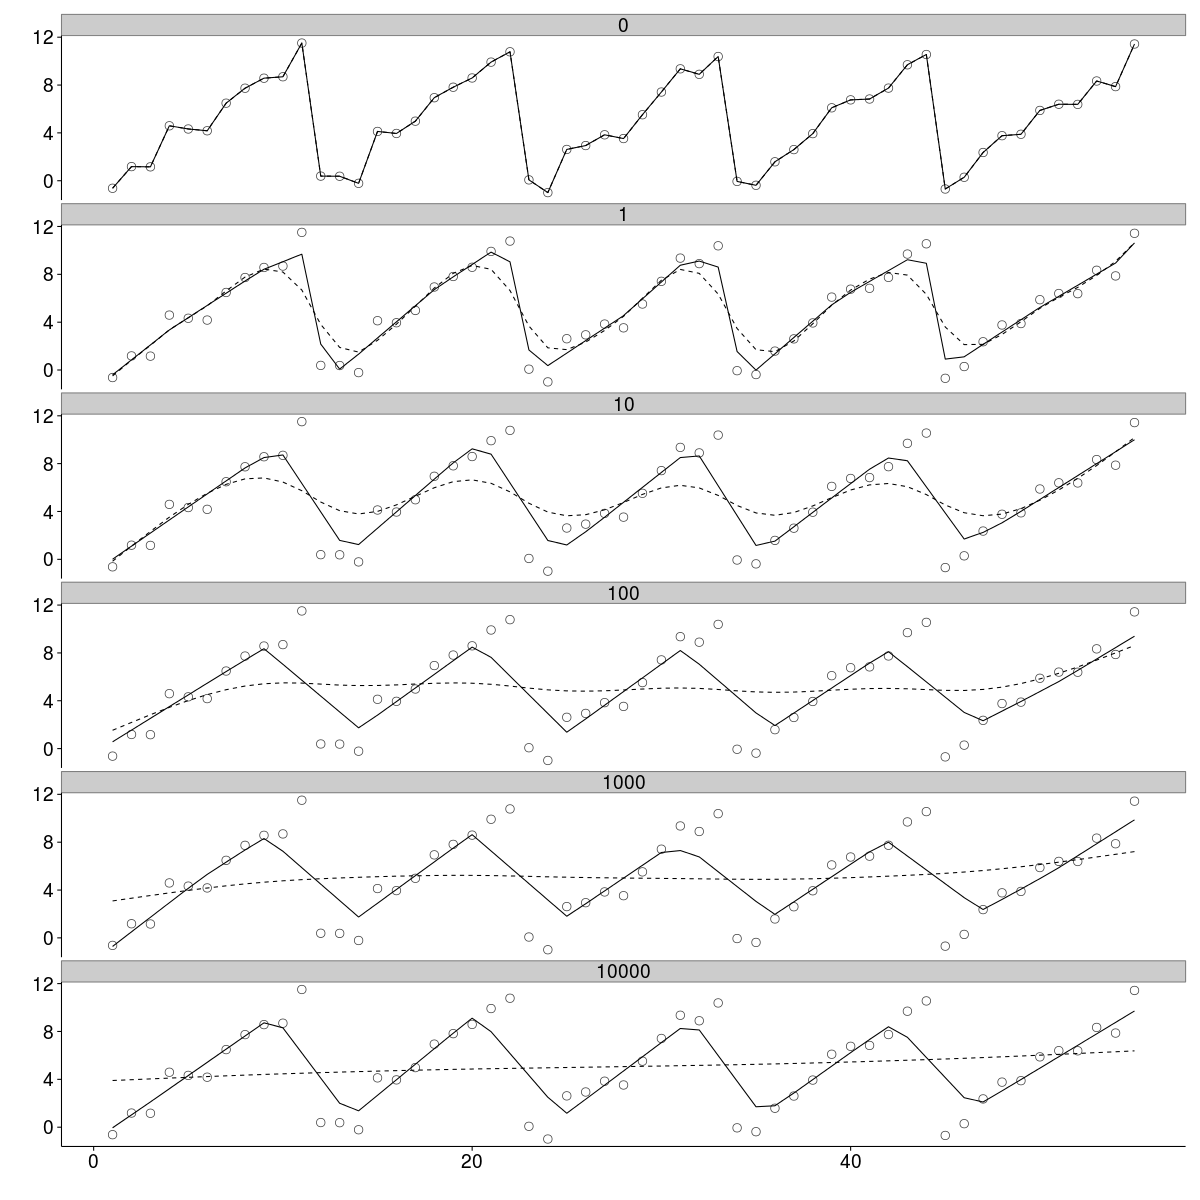 Noisy simulated time series data smoothed using L1 and L2 filters and various regularisation strengths.